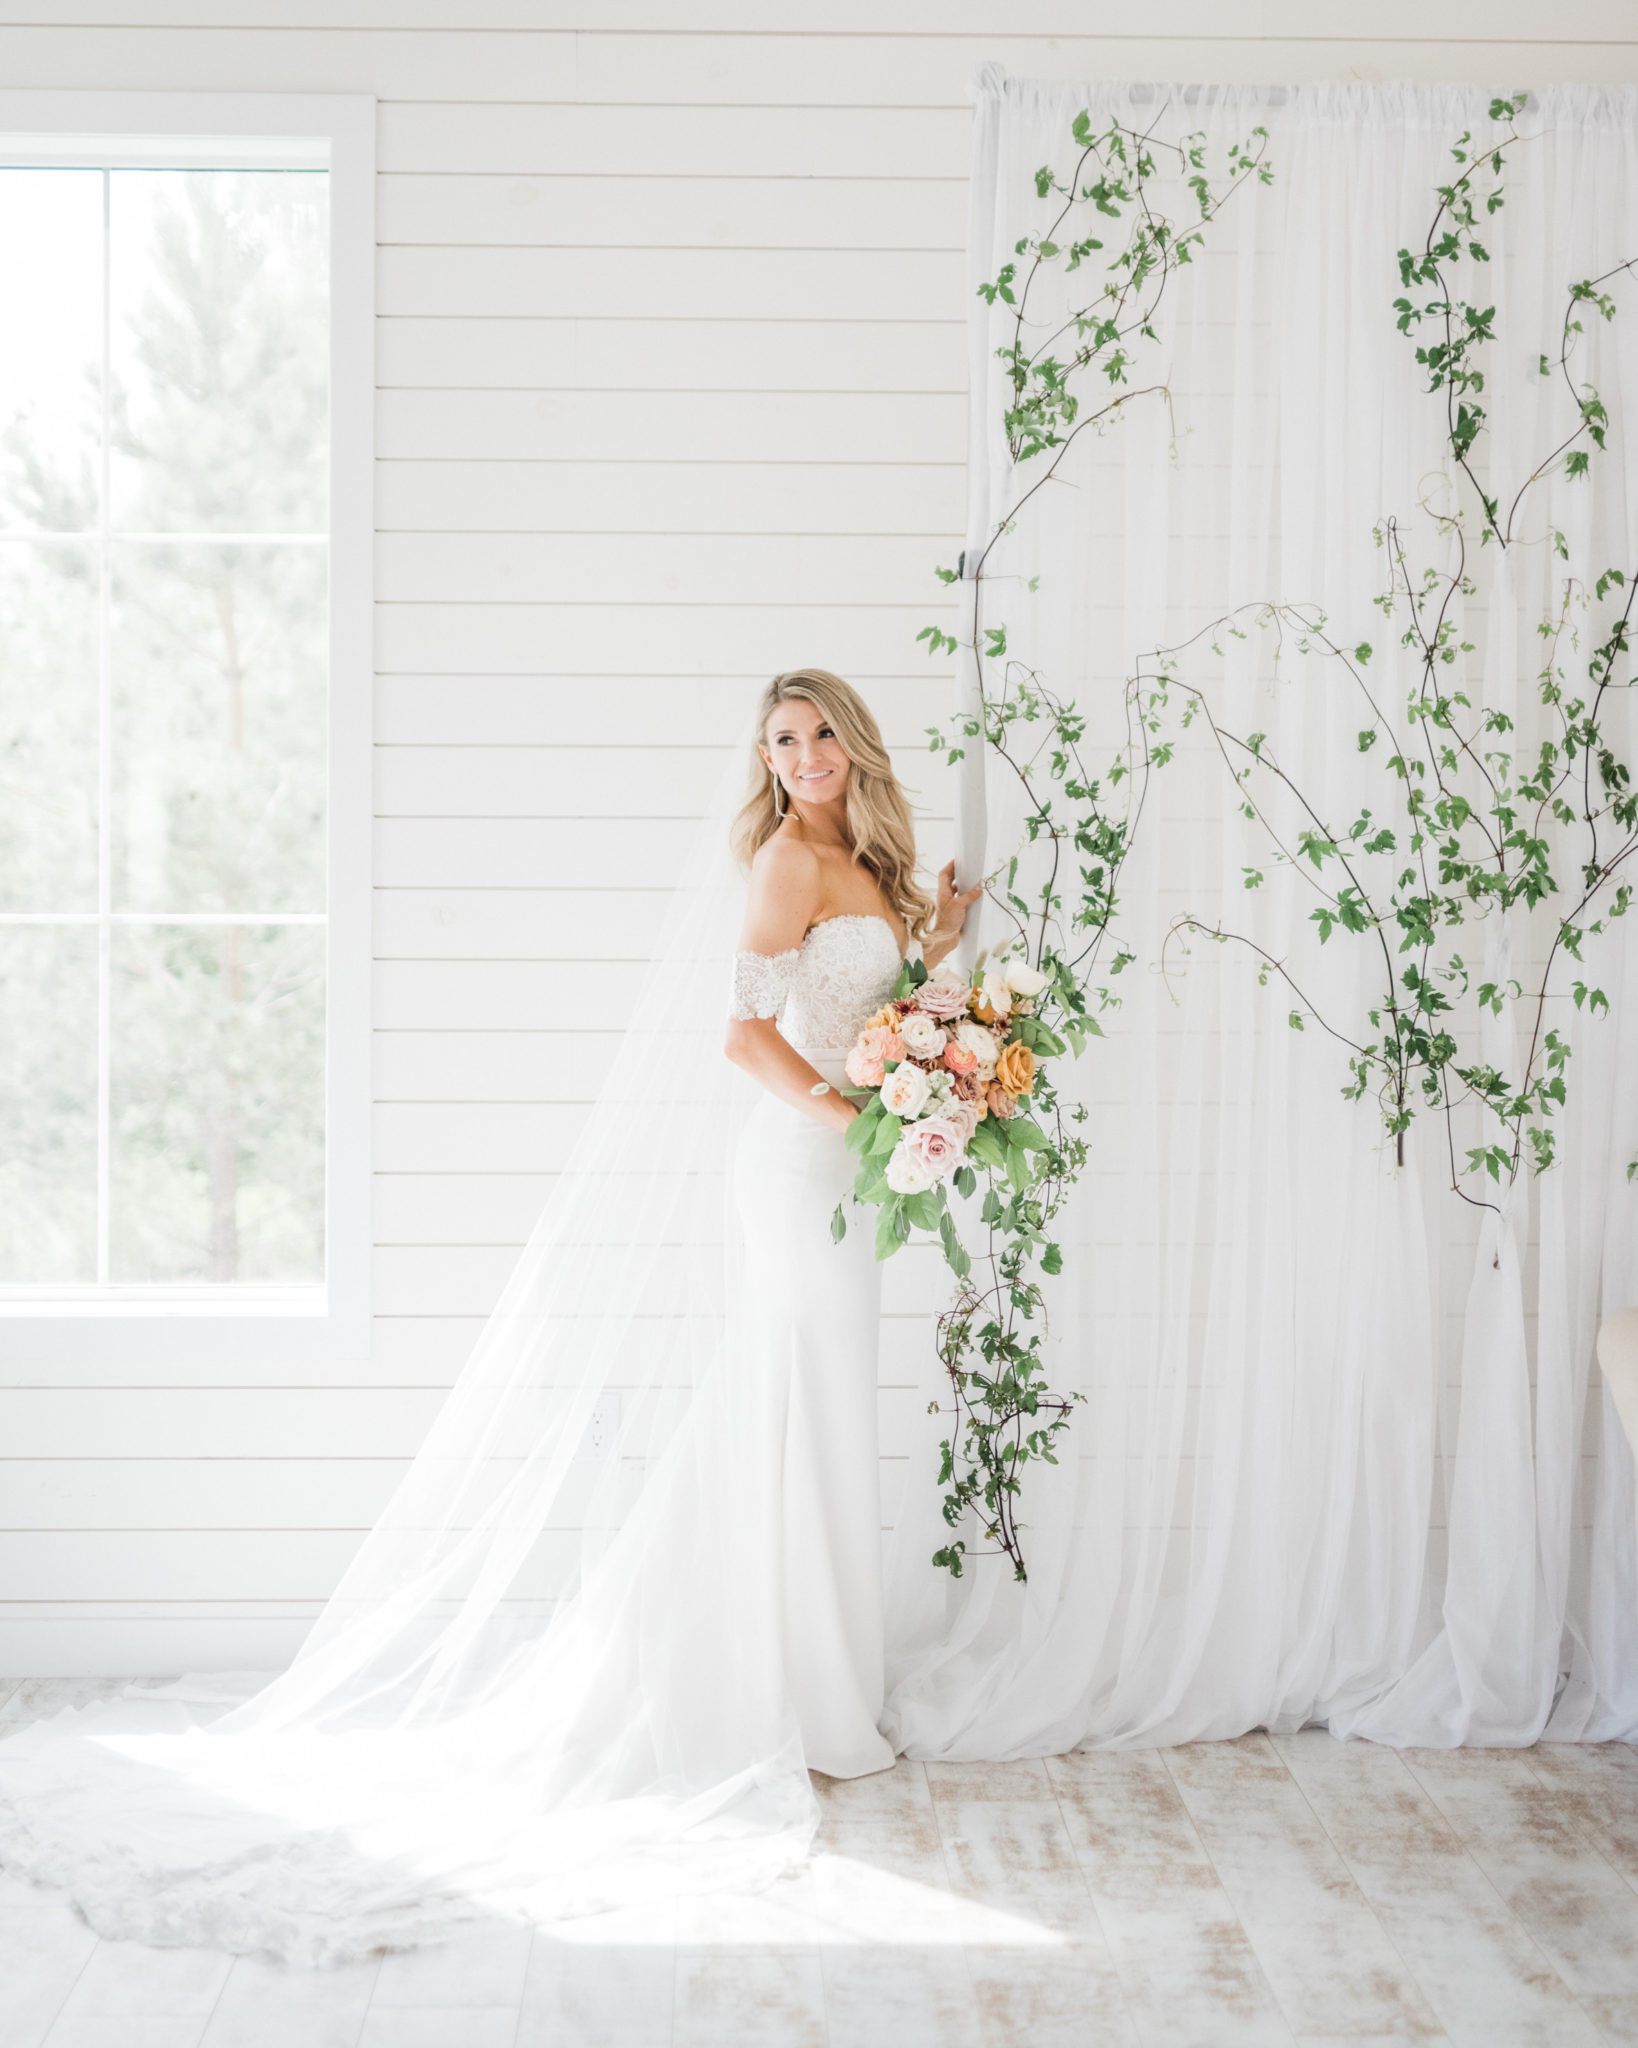 Timeless bridal portraits at the Barn at Wind's Edge